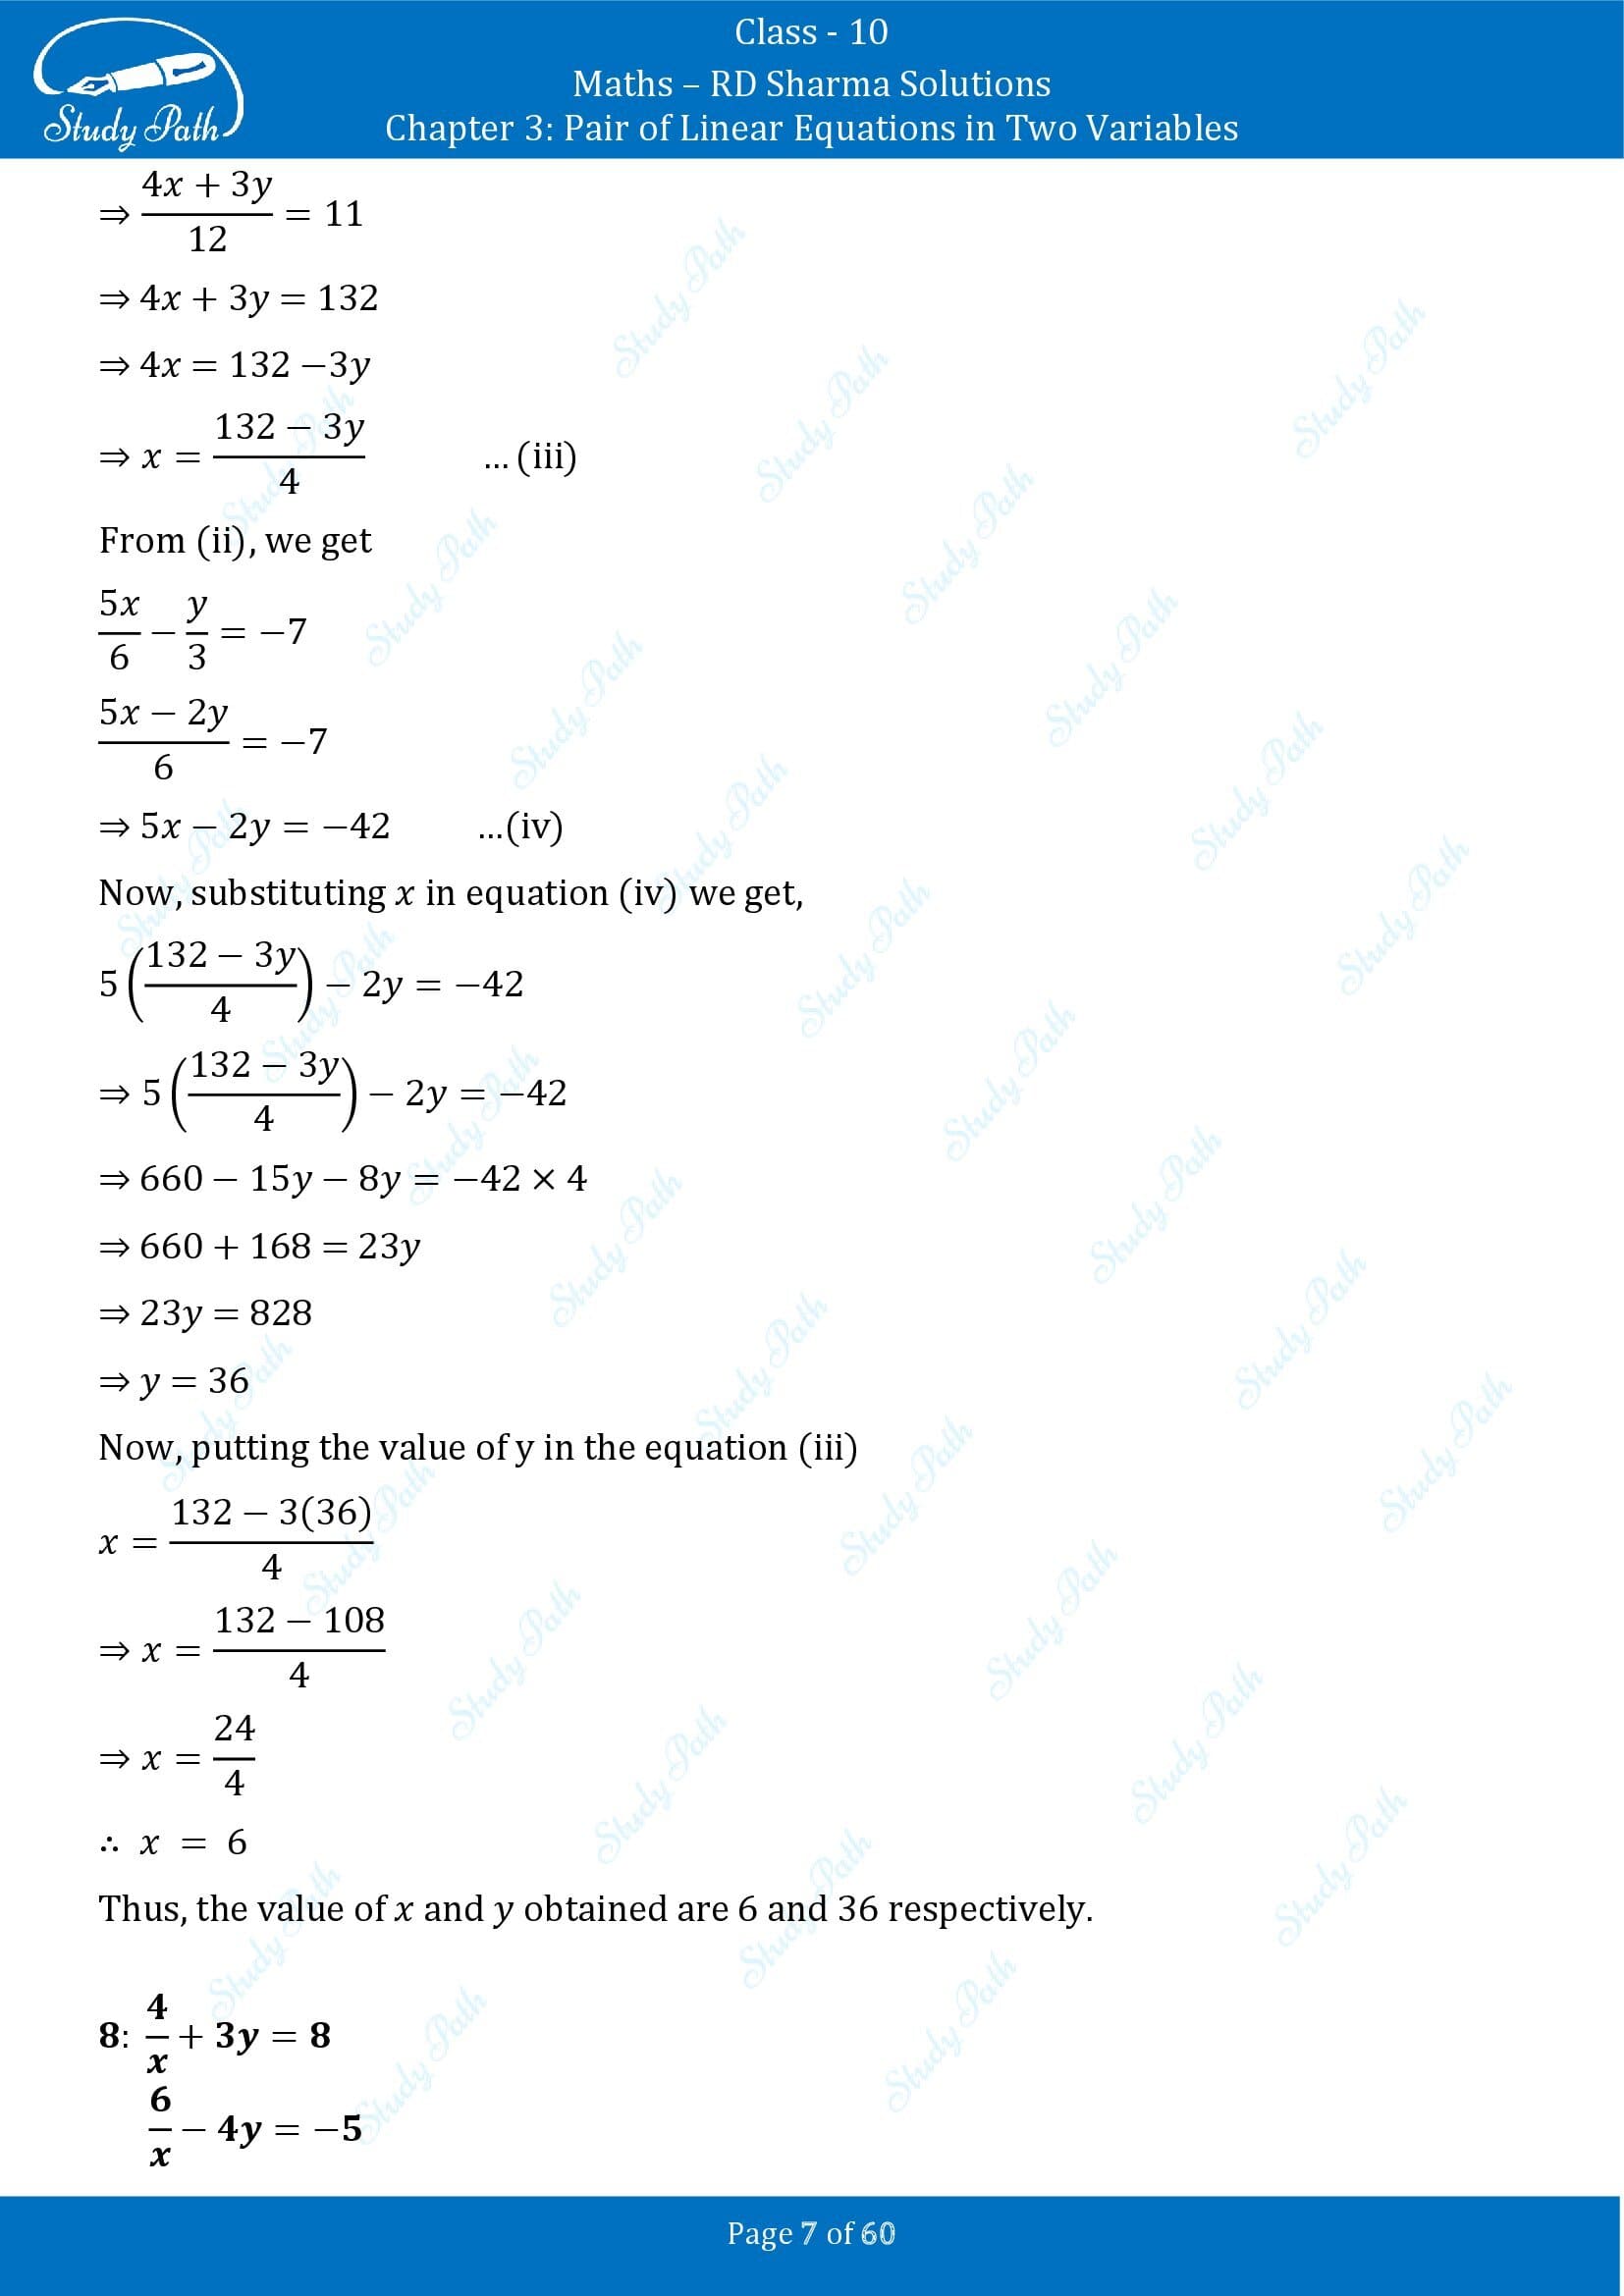 RD Sharma Solutions Class 10 Chapter 3 Pair of Linear Equations in Two Variables Exercise 3.3 00007